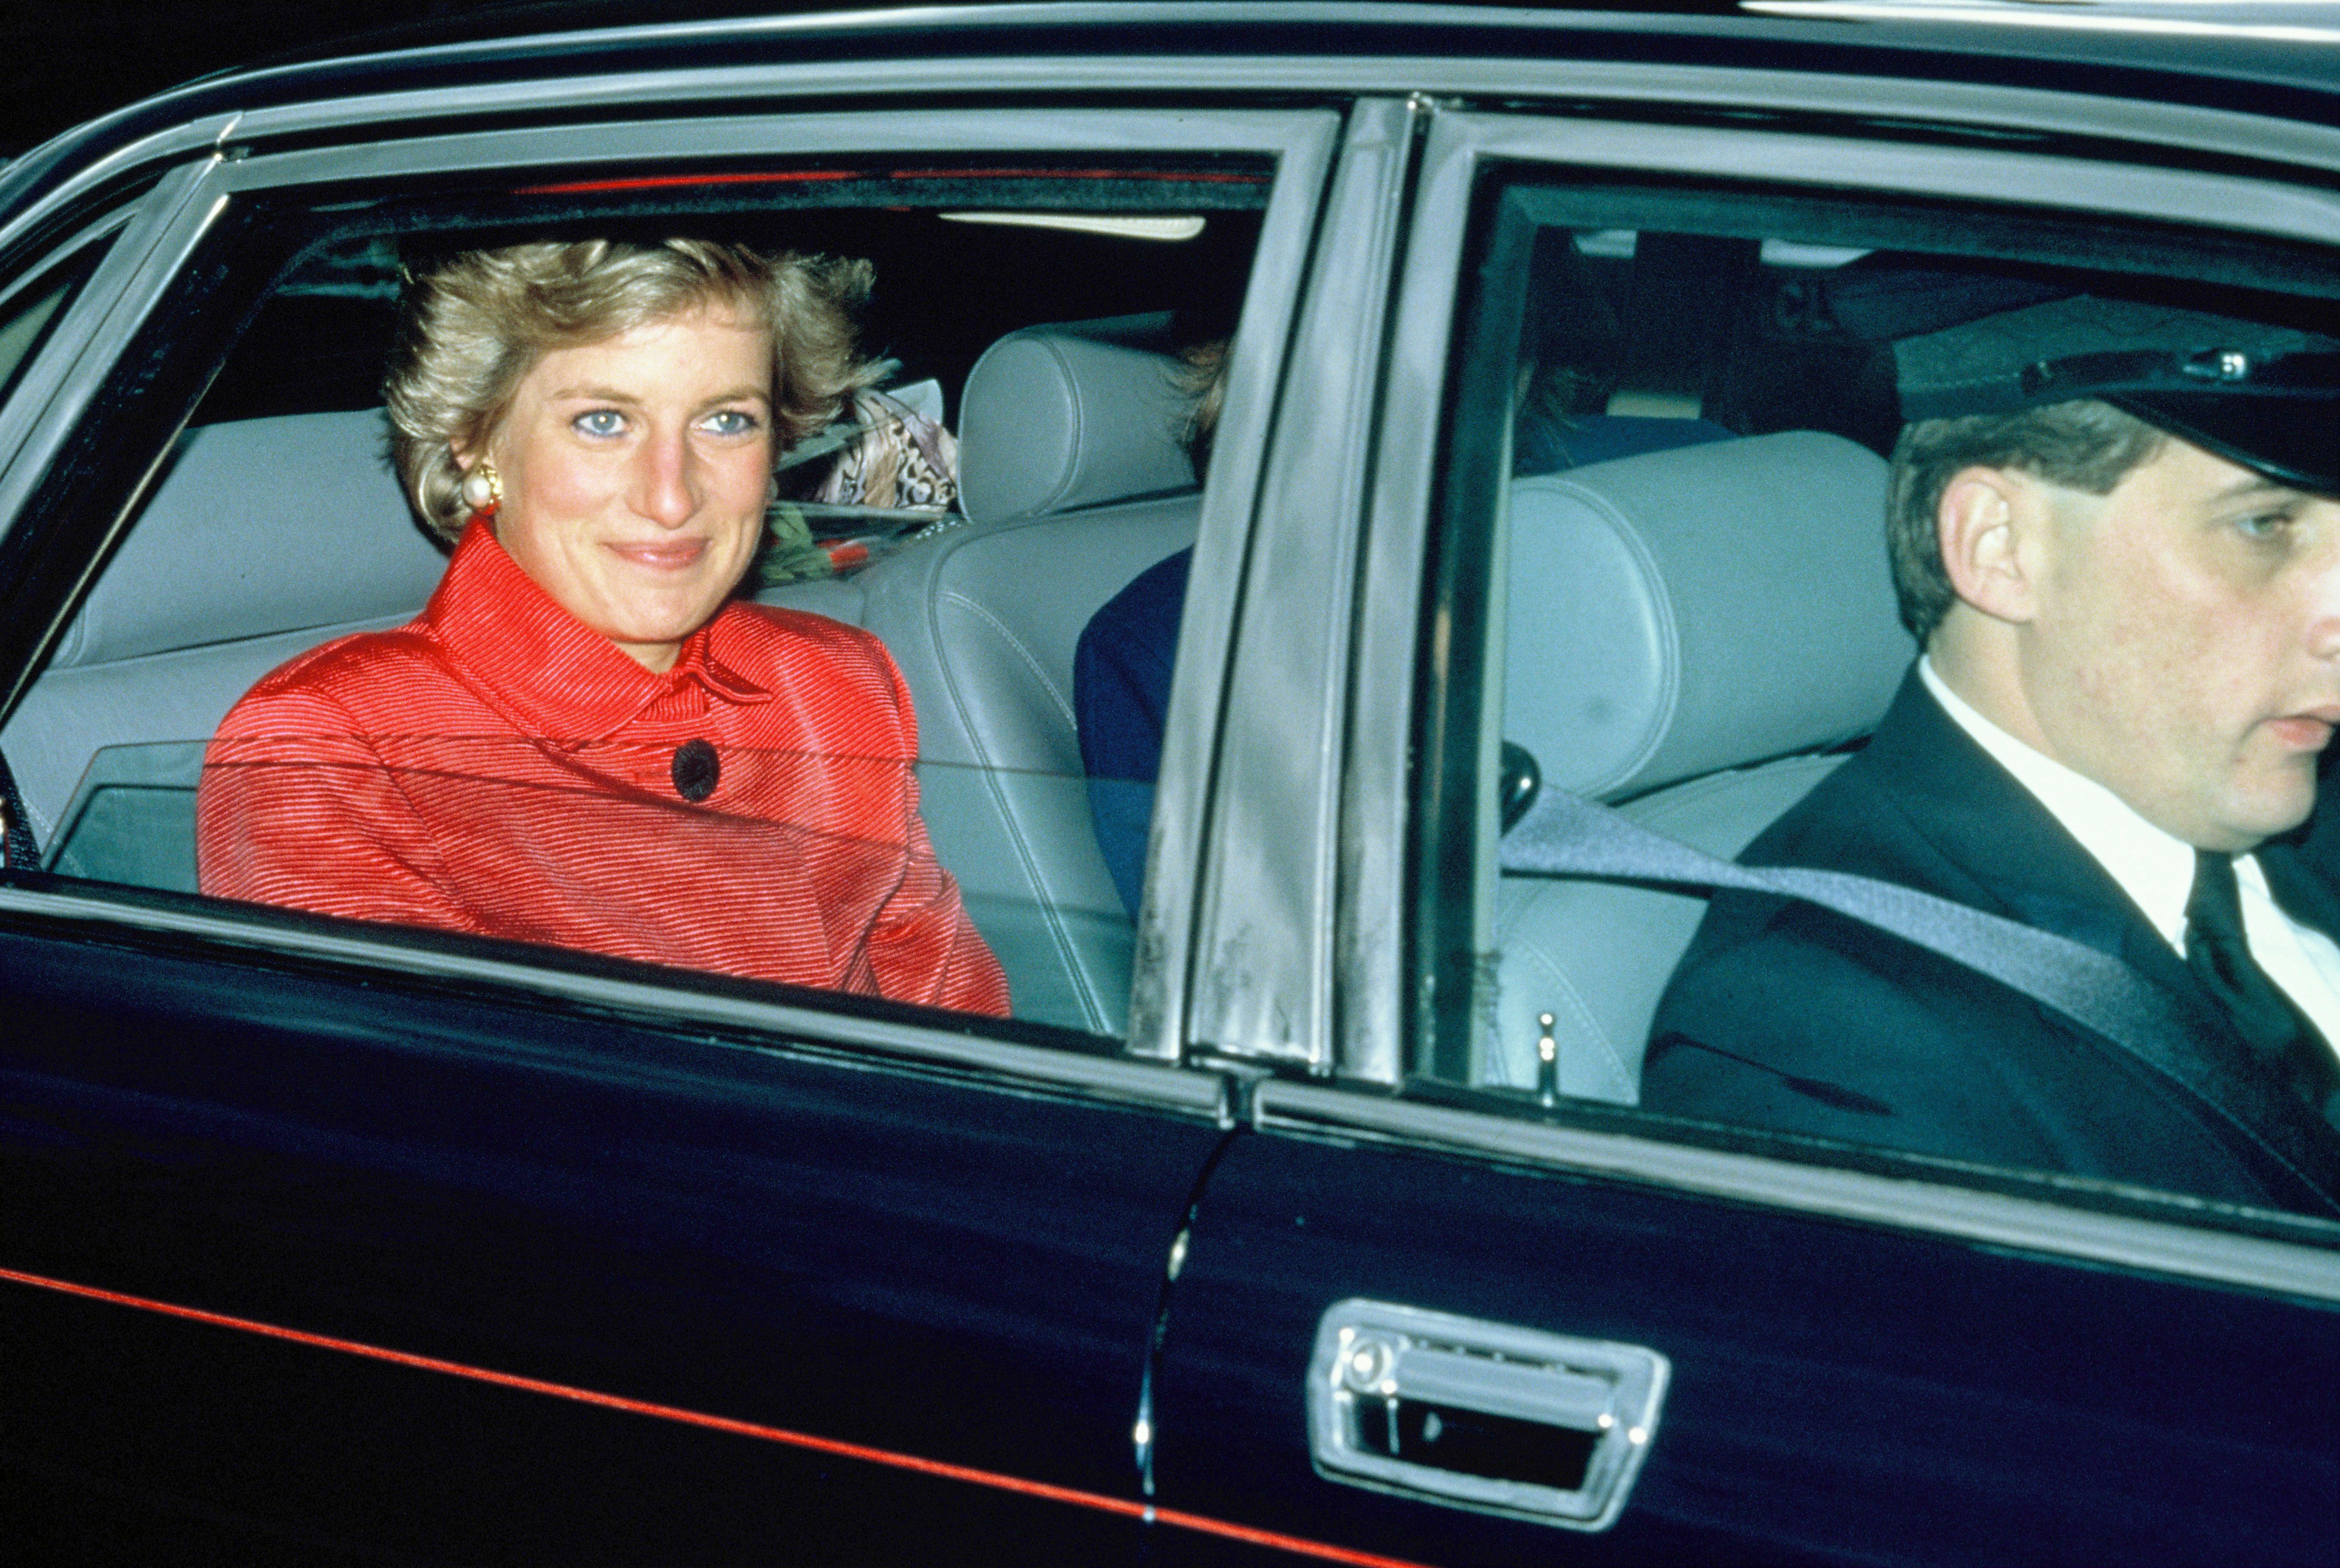 Princess Diana in London 1989. | Source: Getty Images